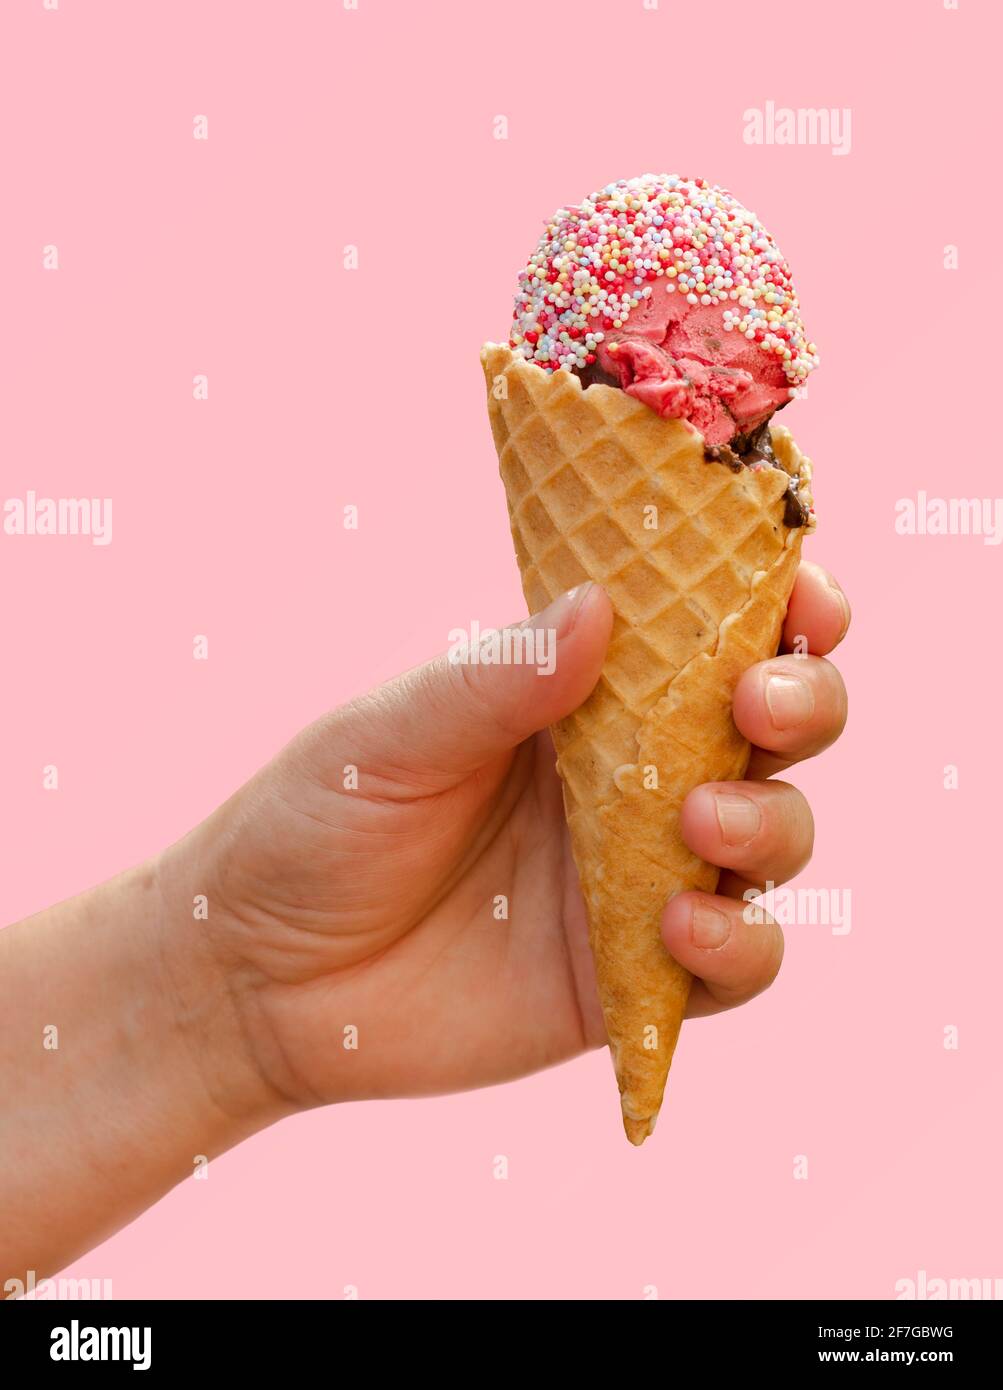 Hand holding strawberry ice cream in waffle cone with candy sprinkles isolated on light pink background, taste of summer concept, frozen dessert Stock Photo